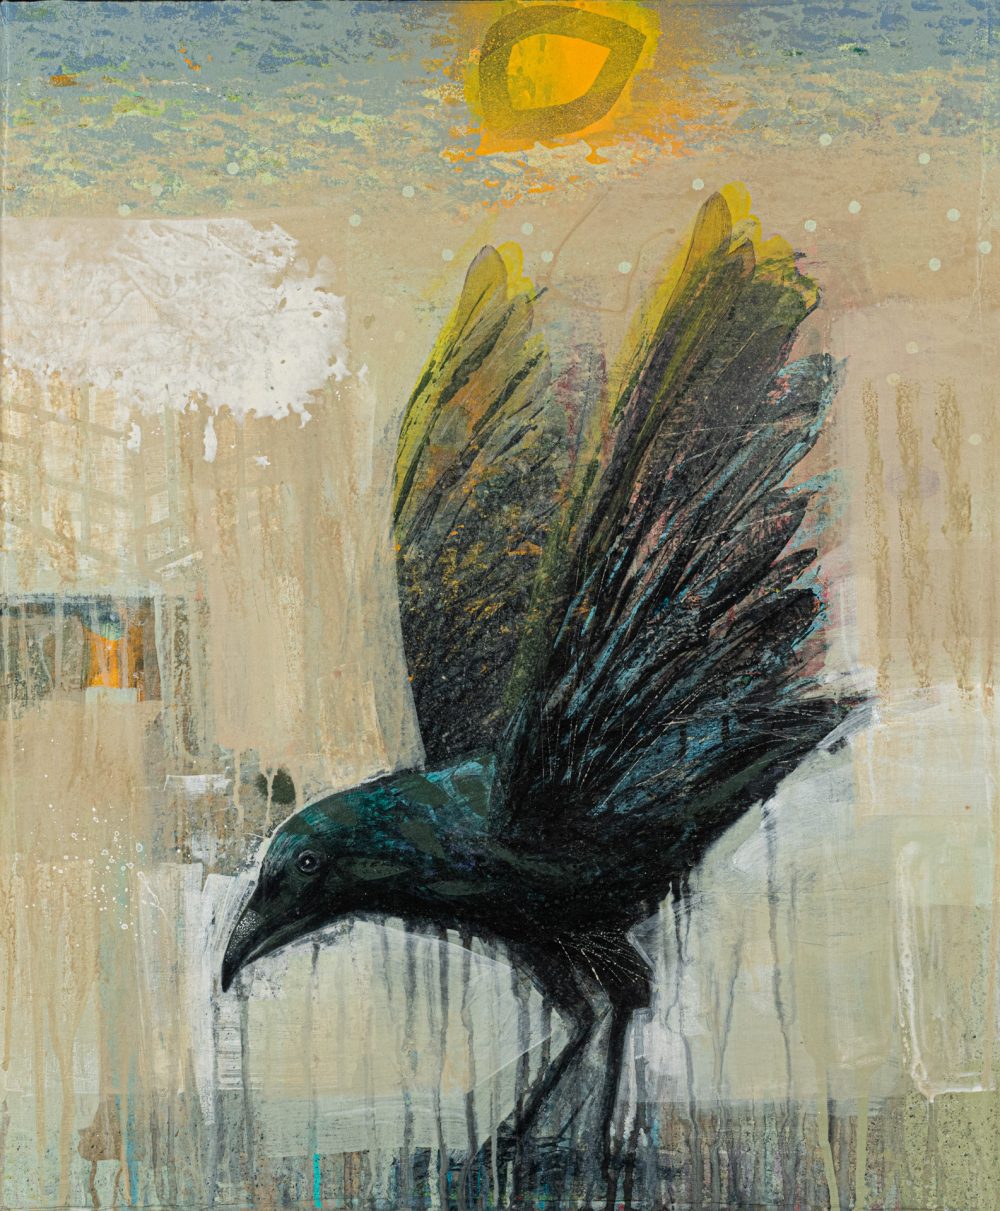 Foggy Day Visitor, mixed media on panel by Tom Wood